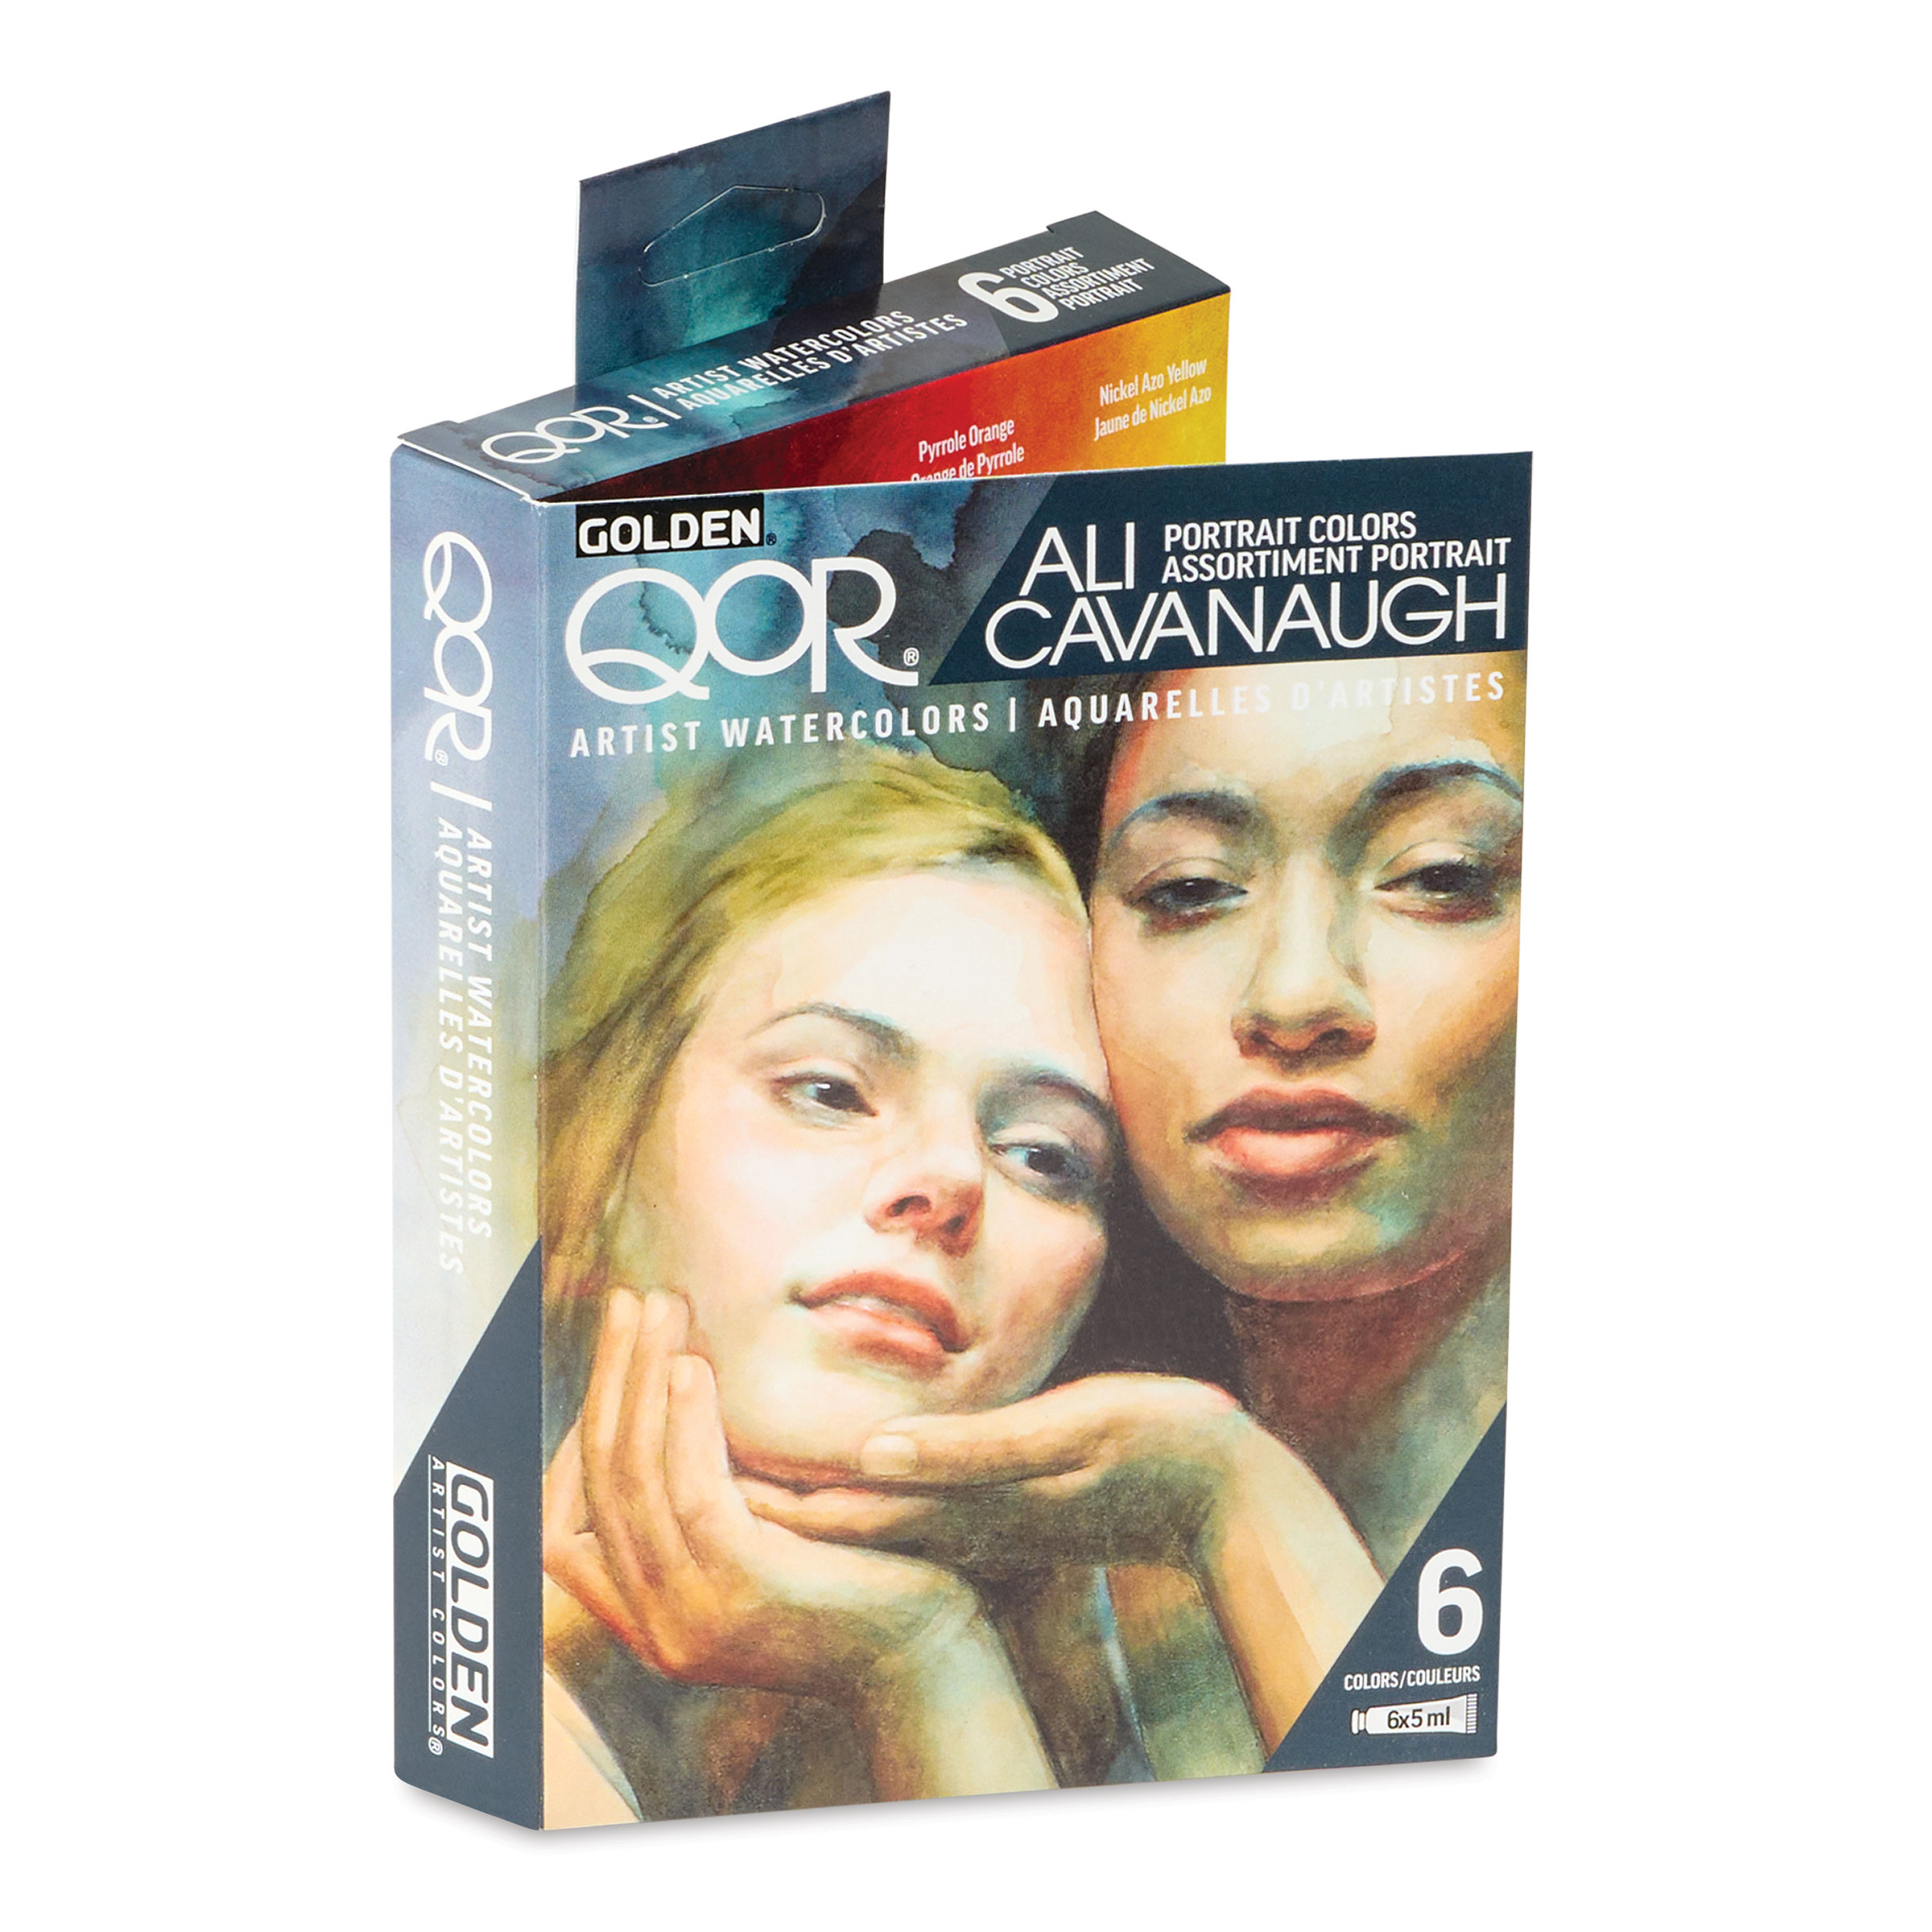 QoR Watercolor Set - Introductory Set of 12 Tubes